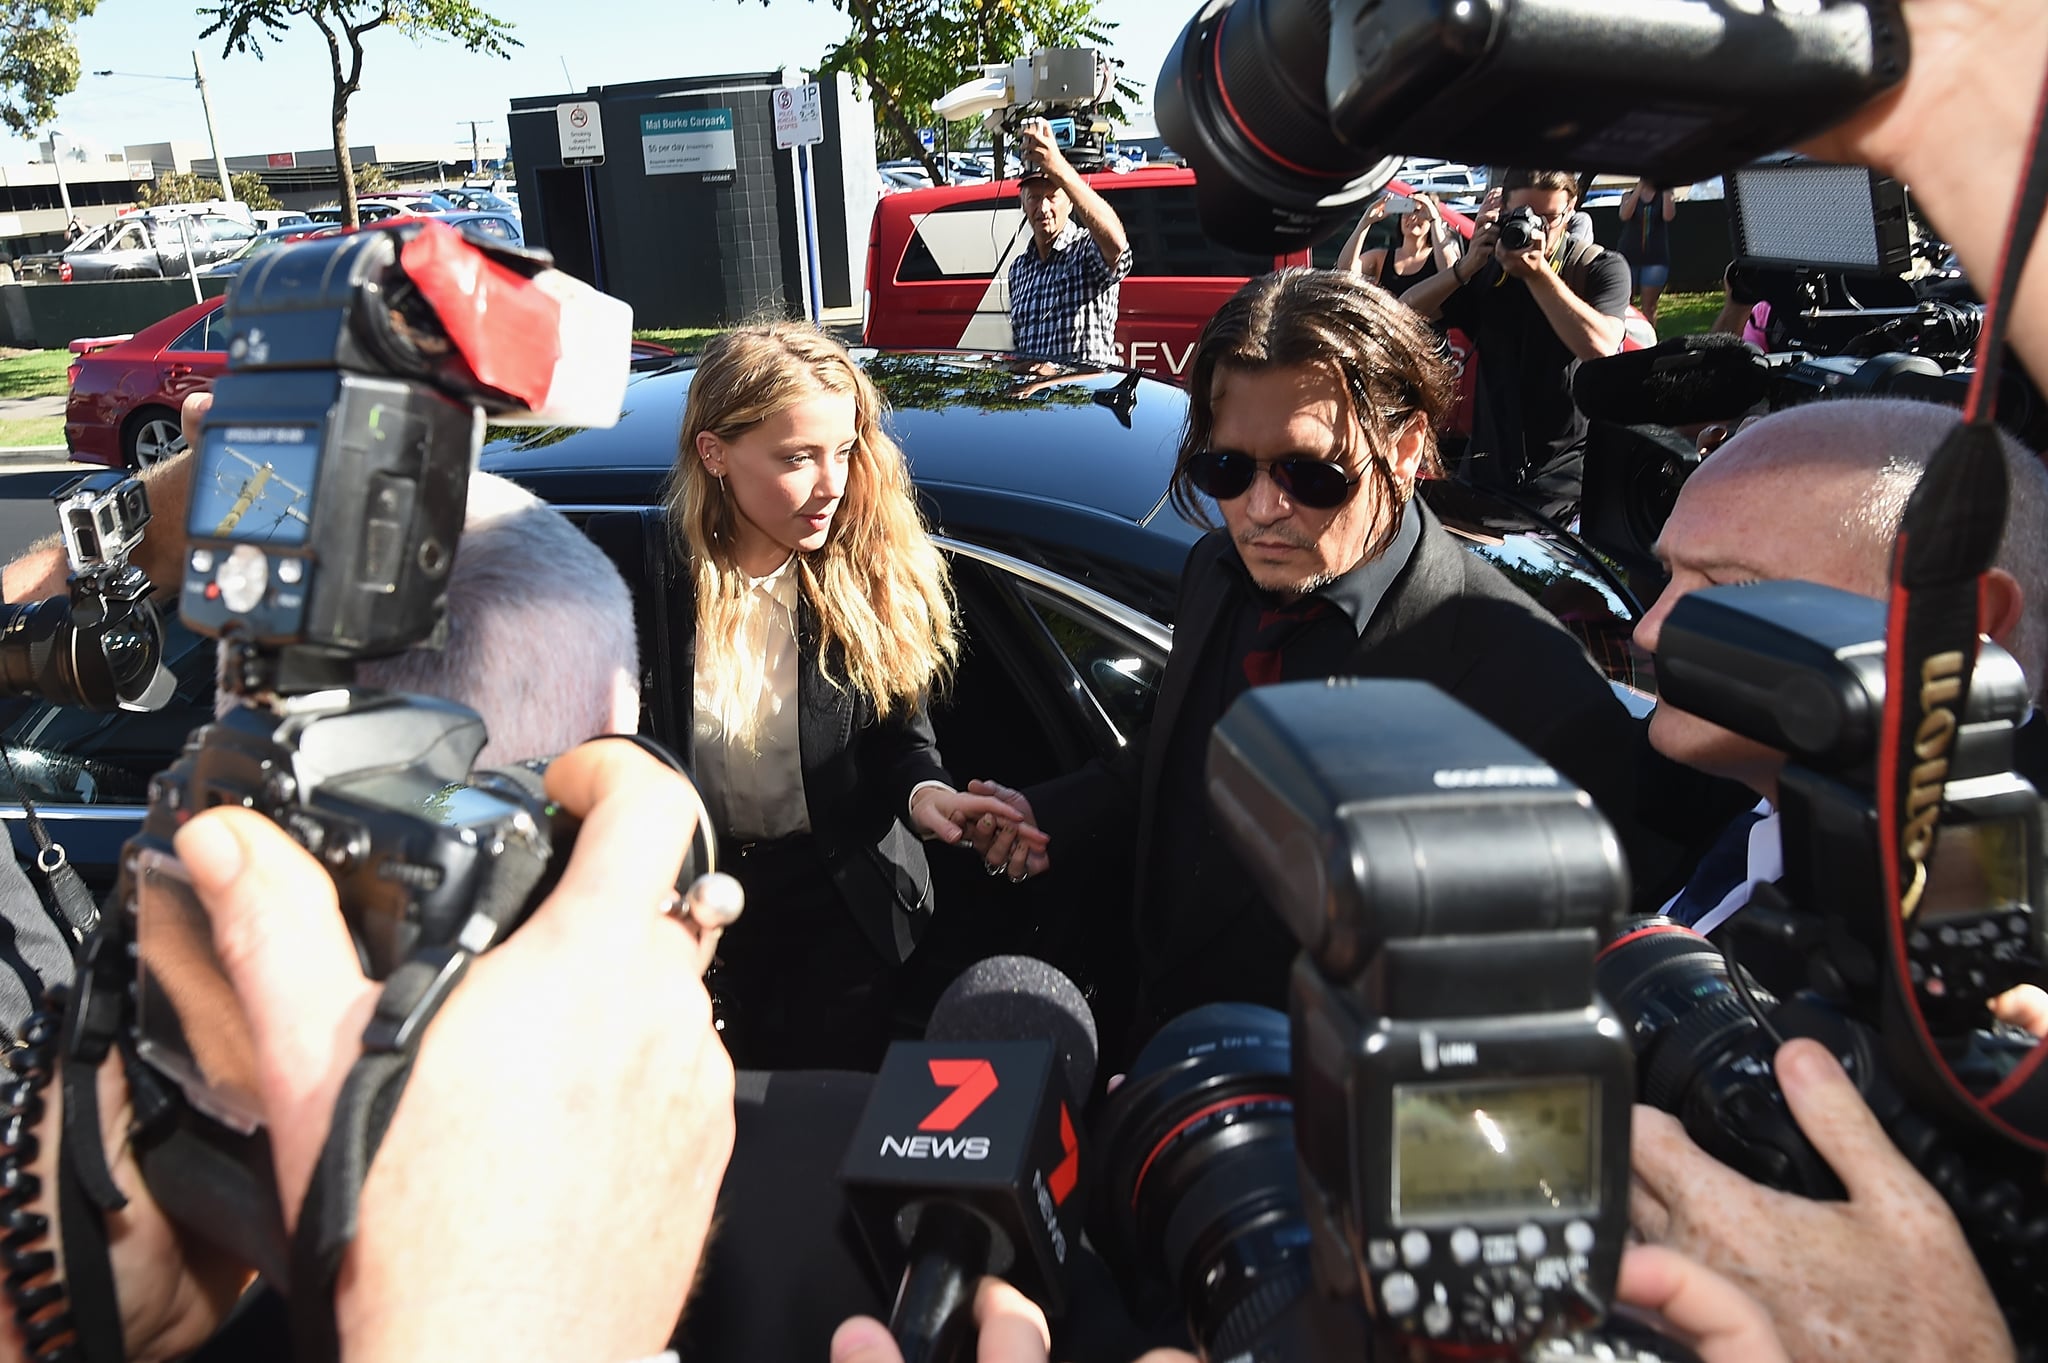 GOLD COAST, AUSTRALIA - APRIL 18: Johnny Depp and Amber Heard arrive at Southport Magistrates Court on April 18, 2016 in Gold Coast, Australia.  Heard faces two counts of violating Australia's quarantine laws by allegedly bringing her dogs, Pistol and Boo, on a private jet in May 2015.  (Photo by Matt Roberts/Getty Images)